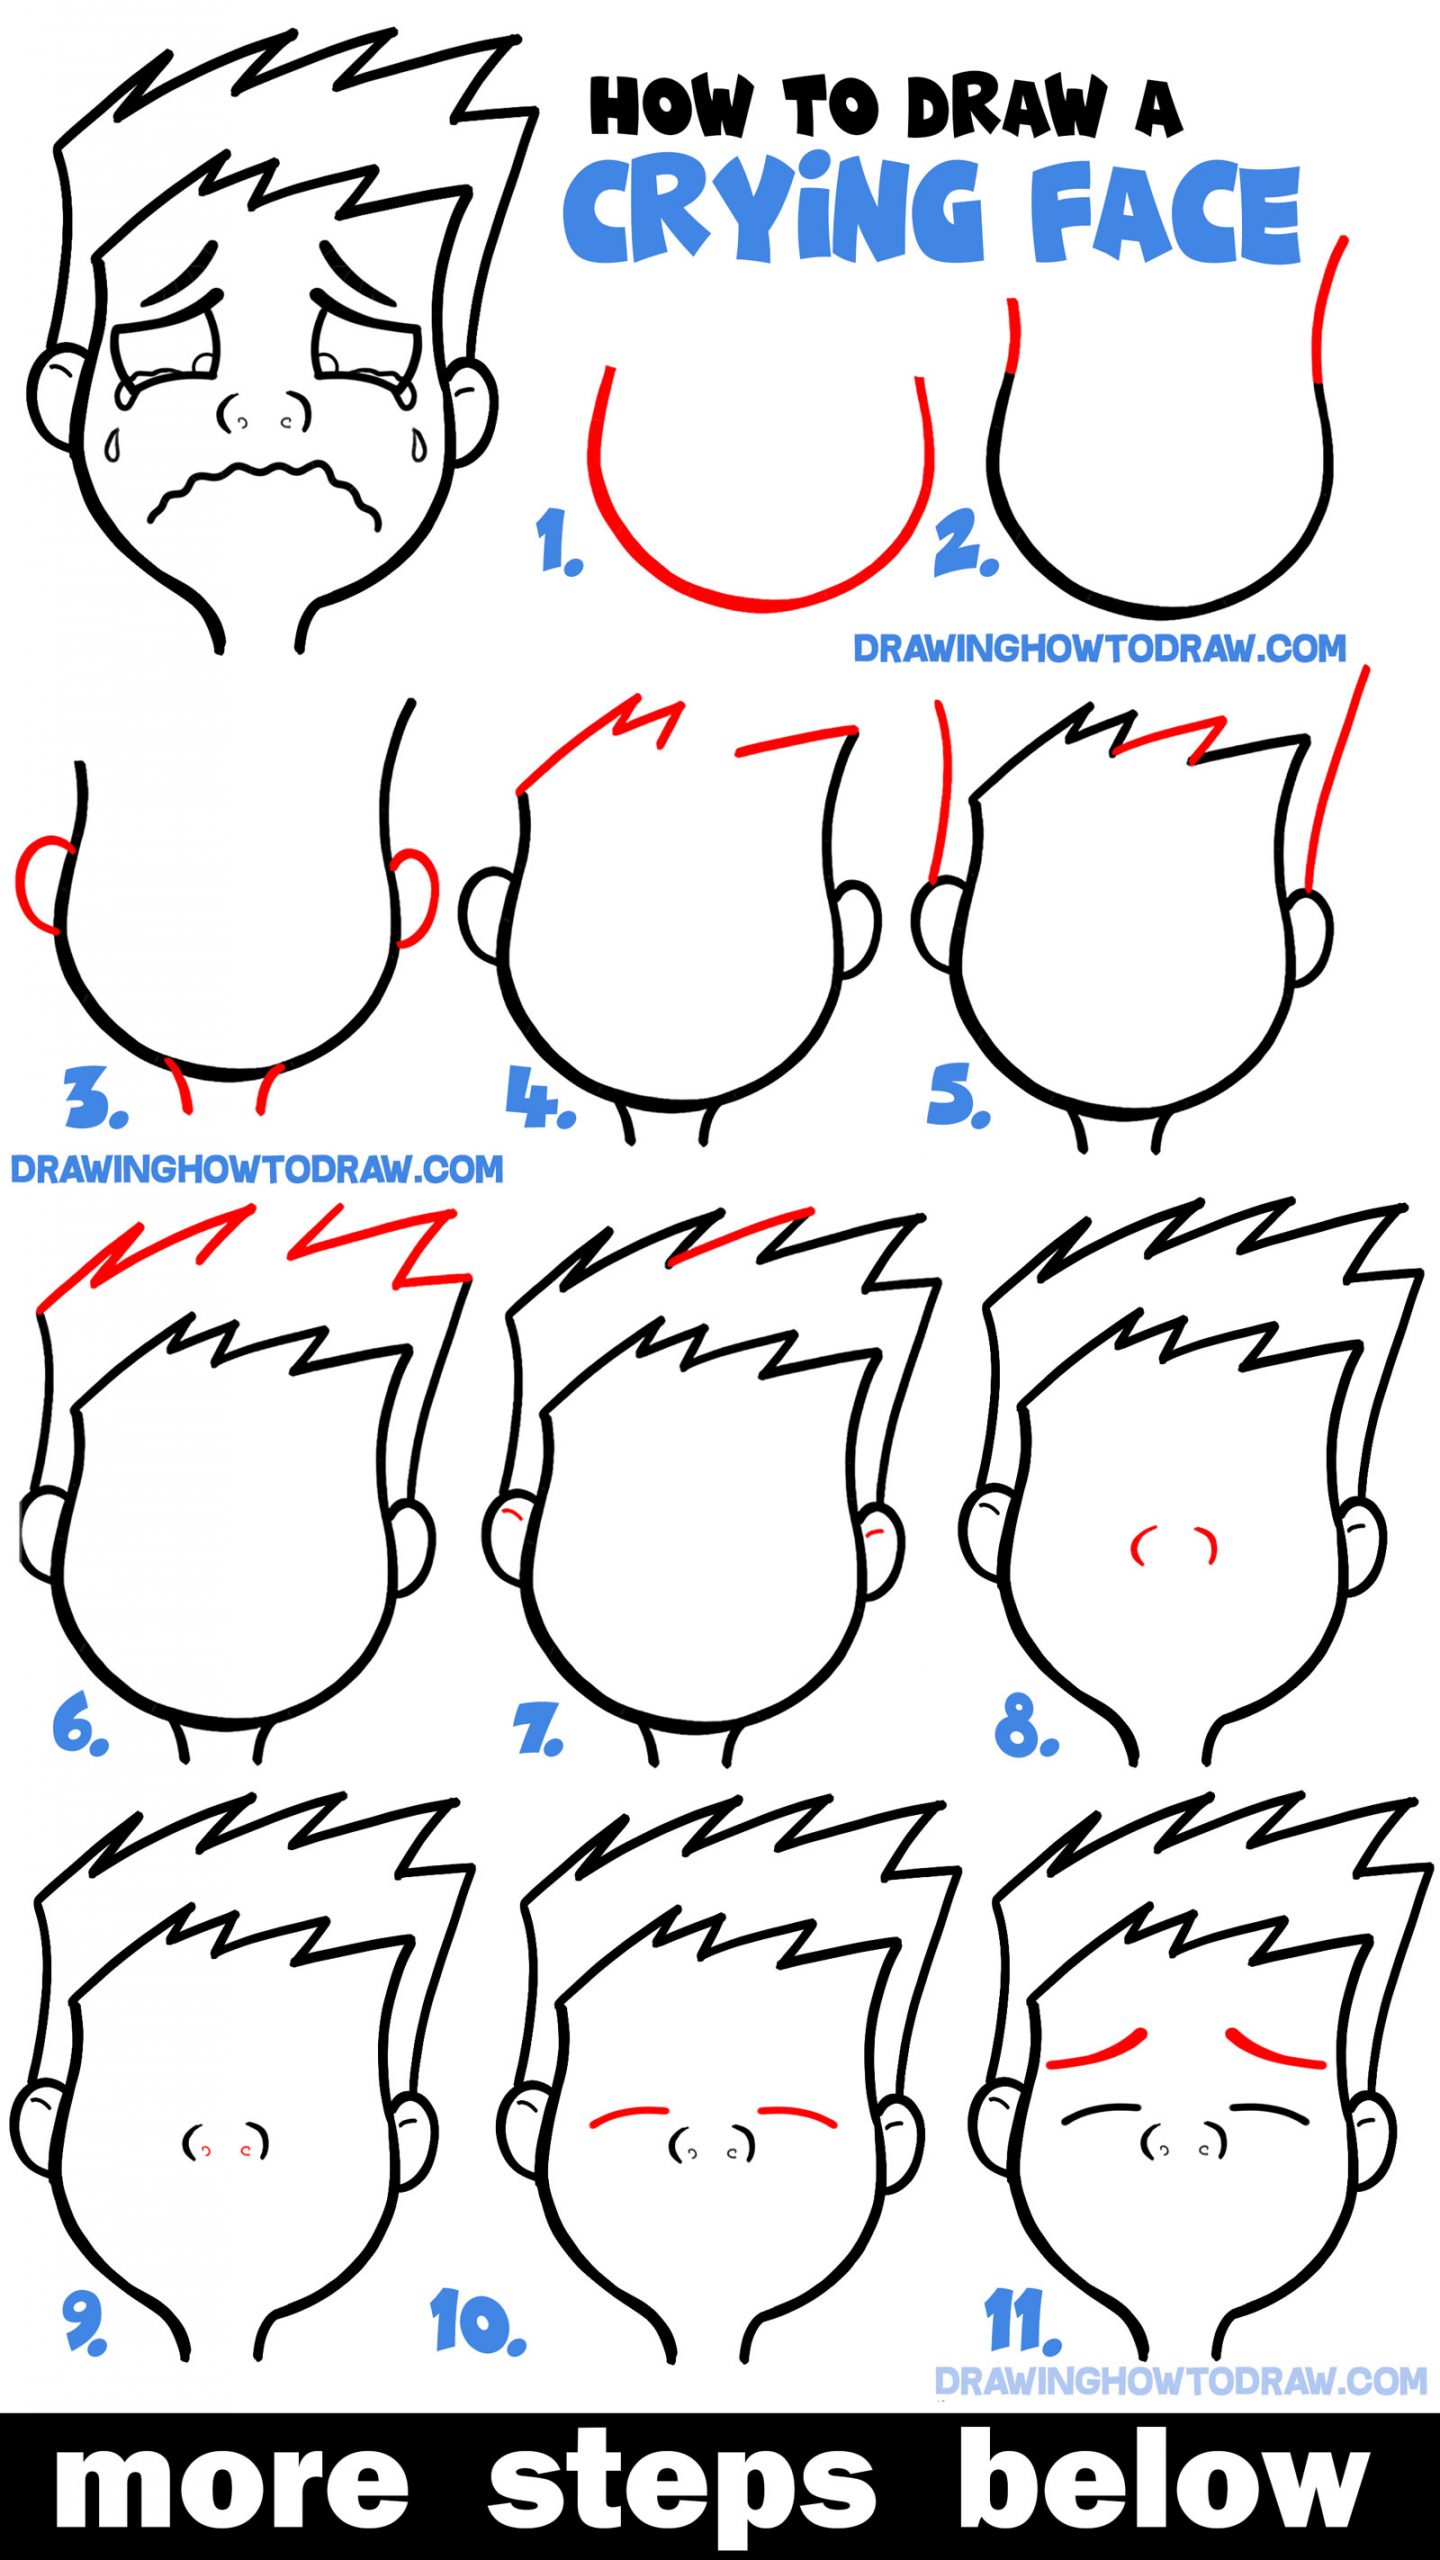 Learn How to Draw Cartoon Facial Expressions : Crying, Sobbing, Weeping